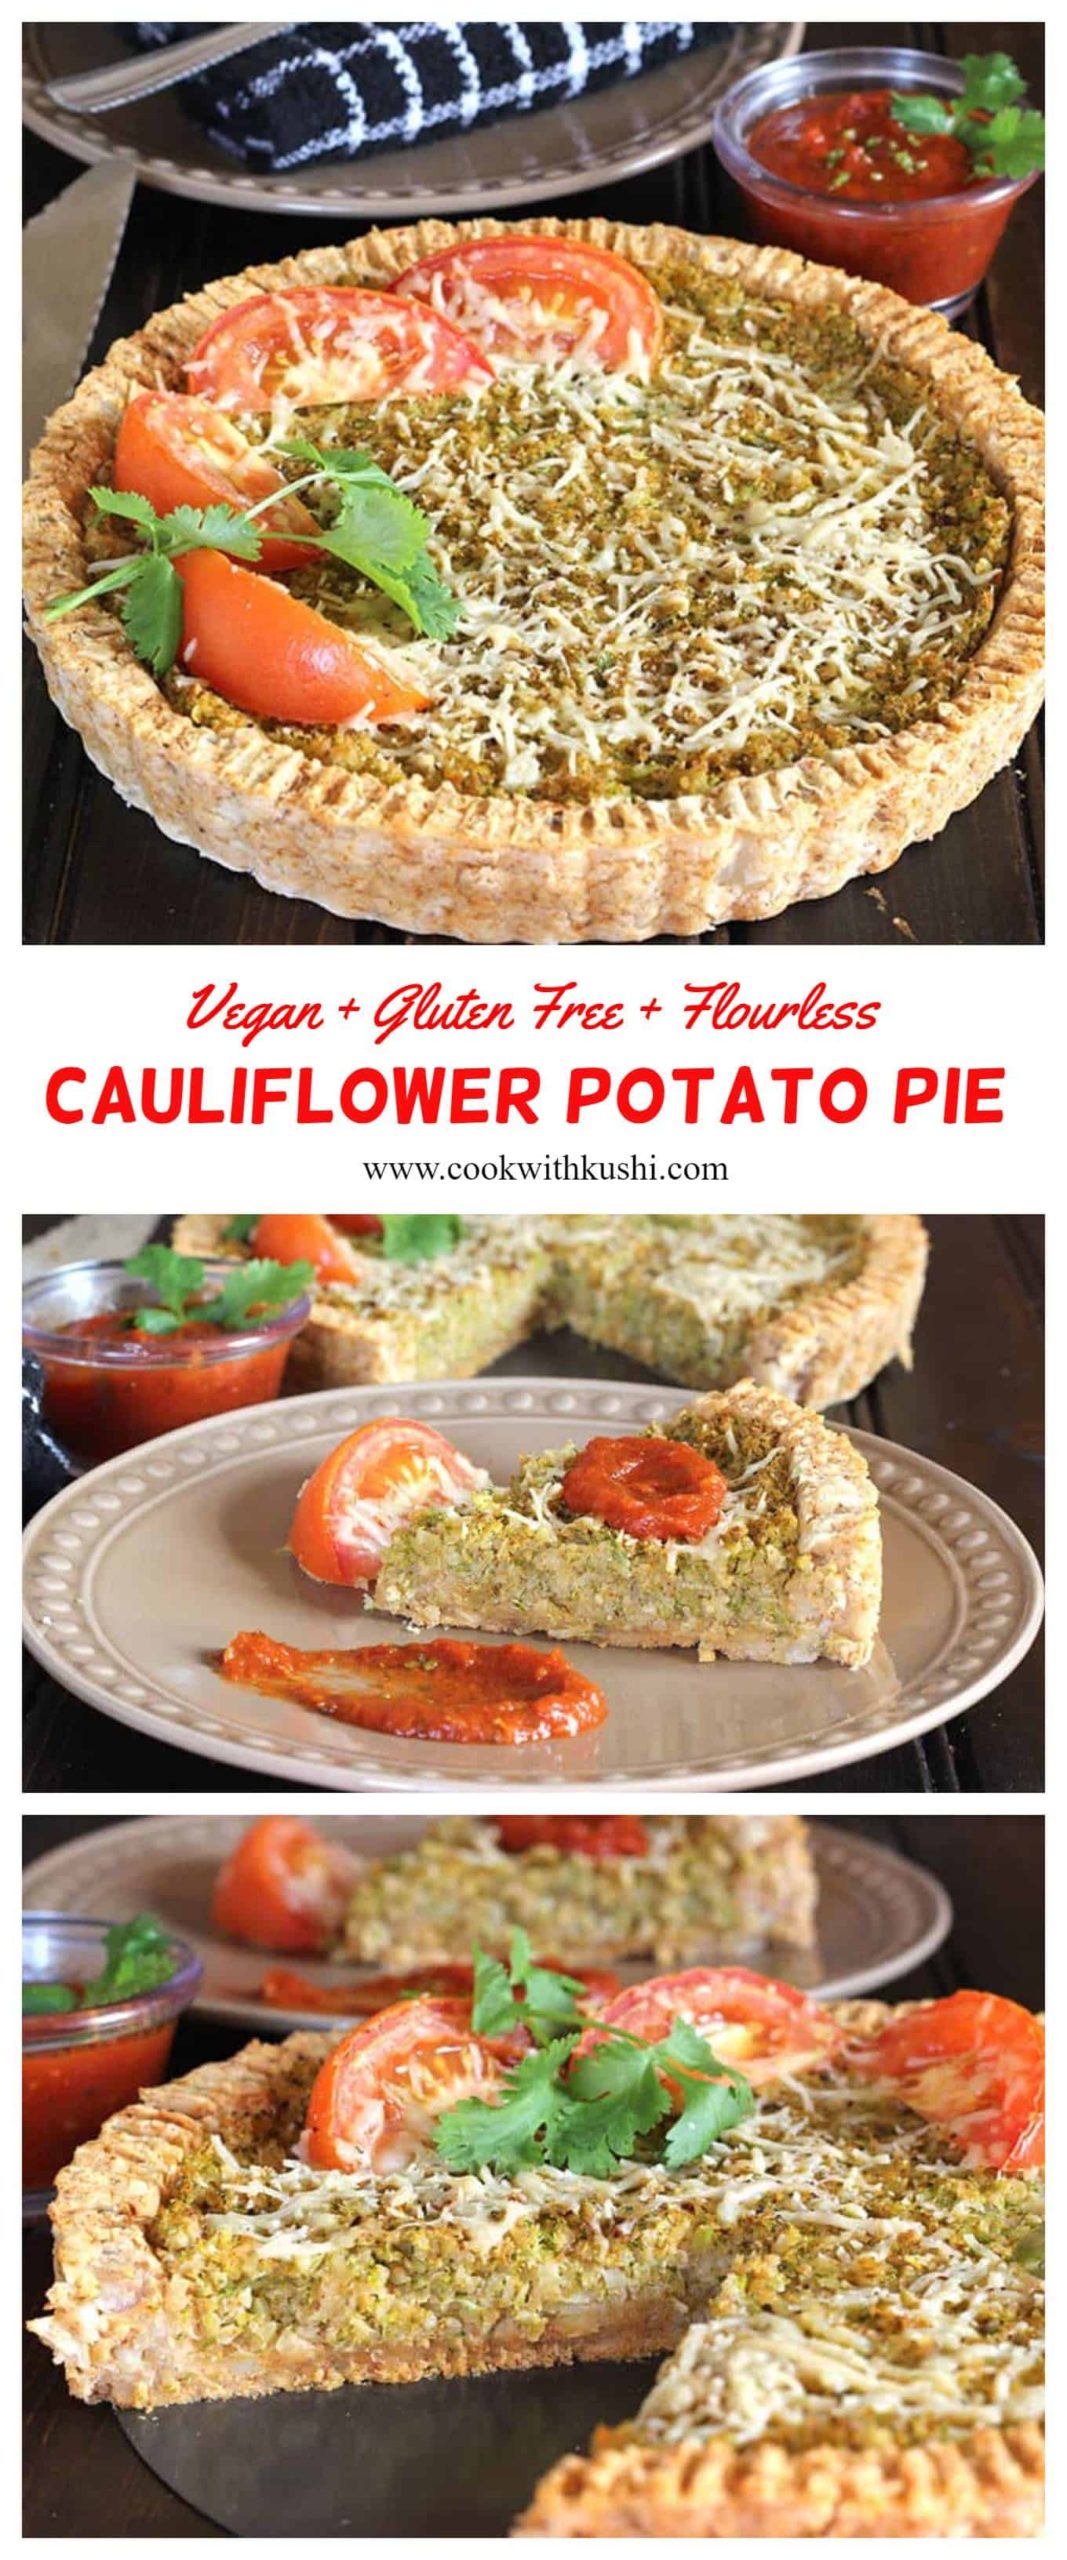 auliflower Potato Pie  is a delicious vegan or vegetarian savory pie that is hearty and satisfying with a crispy crust loaded with flavorful filling. This pie will be a super hit at your dinner table this Thanksgiving and Christmas Holiday. The recipe is vegan, flourless and gluten free. #meatlesspie #vegandinner #vegantart #thanksgivingpie #holidaybaking #potatorecipes #healthydinnercasseroles #broccolibake 